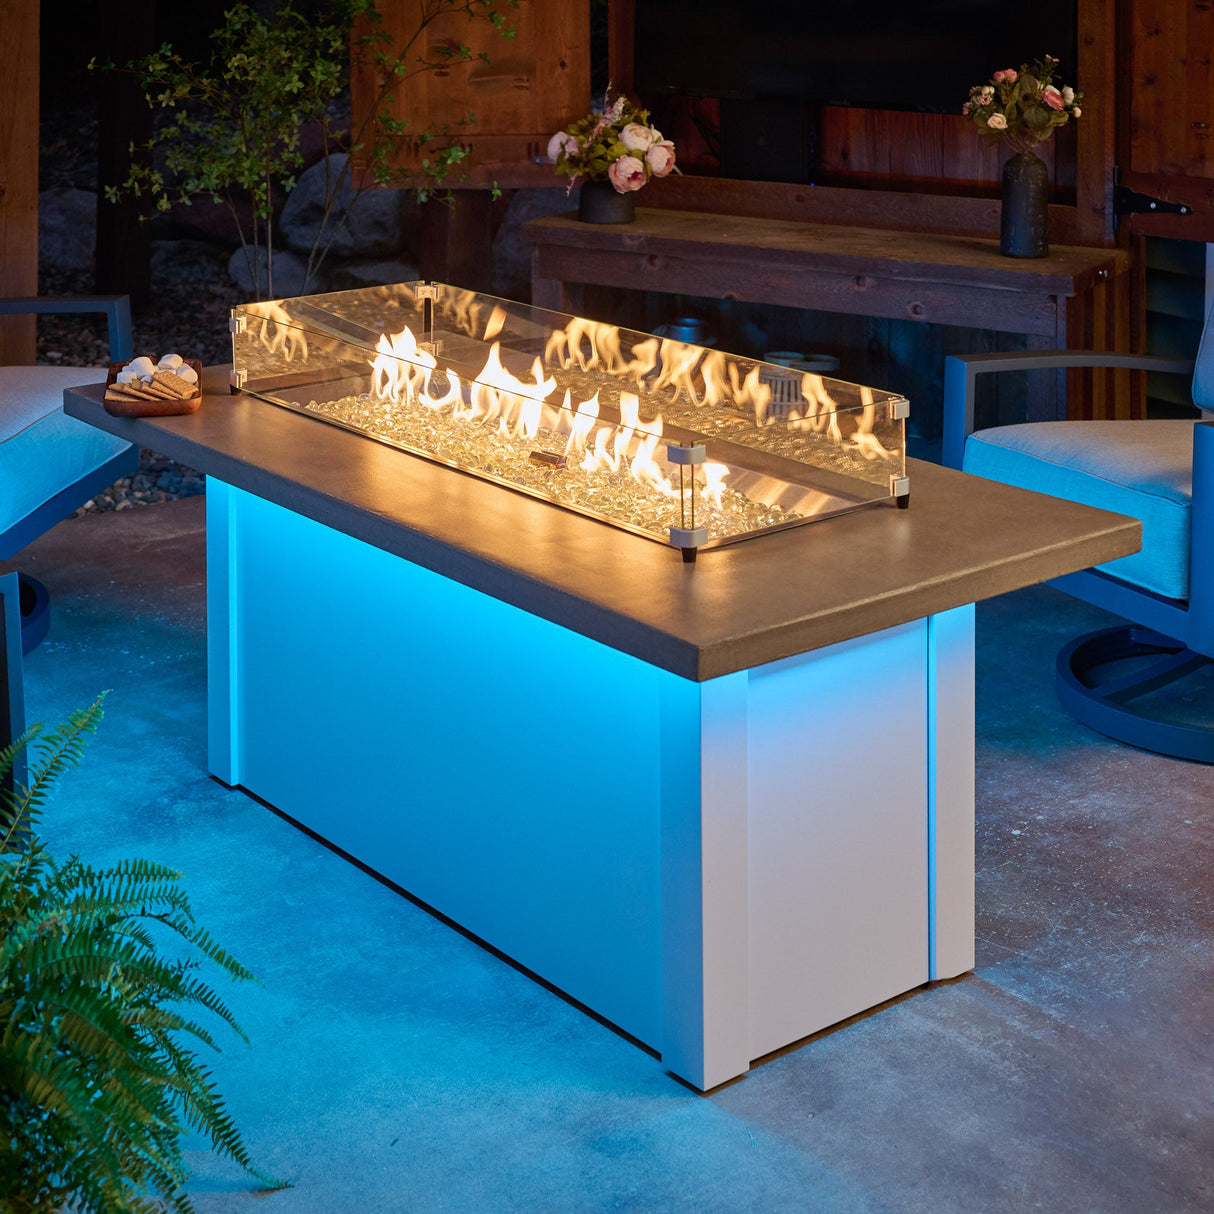 The Havenwood Linear Gas Fire Pit Table with a Pebble Grey top and White base being used on a dark night in a patio setting